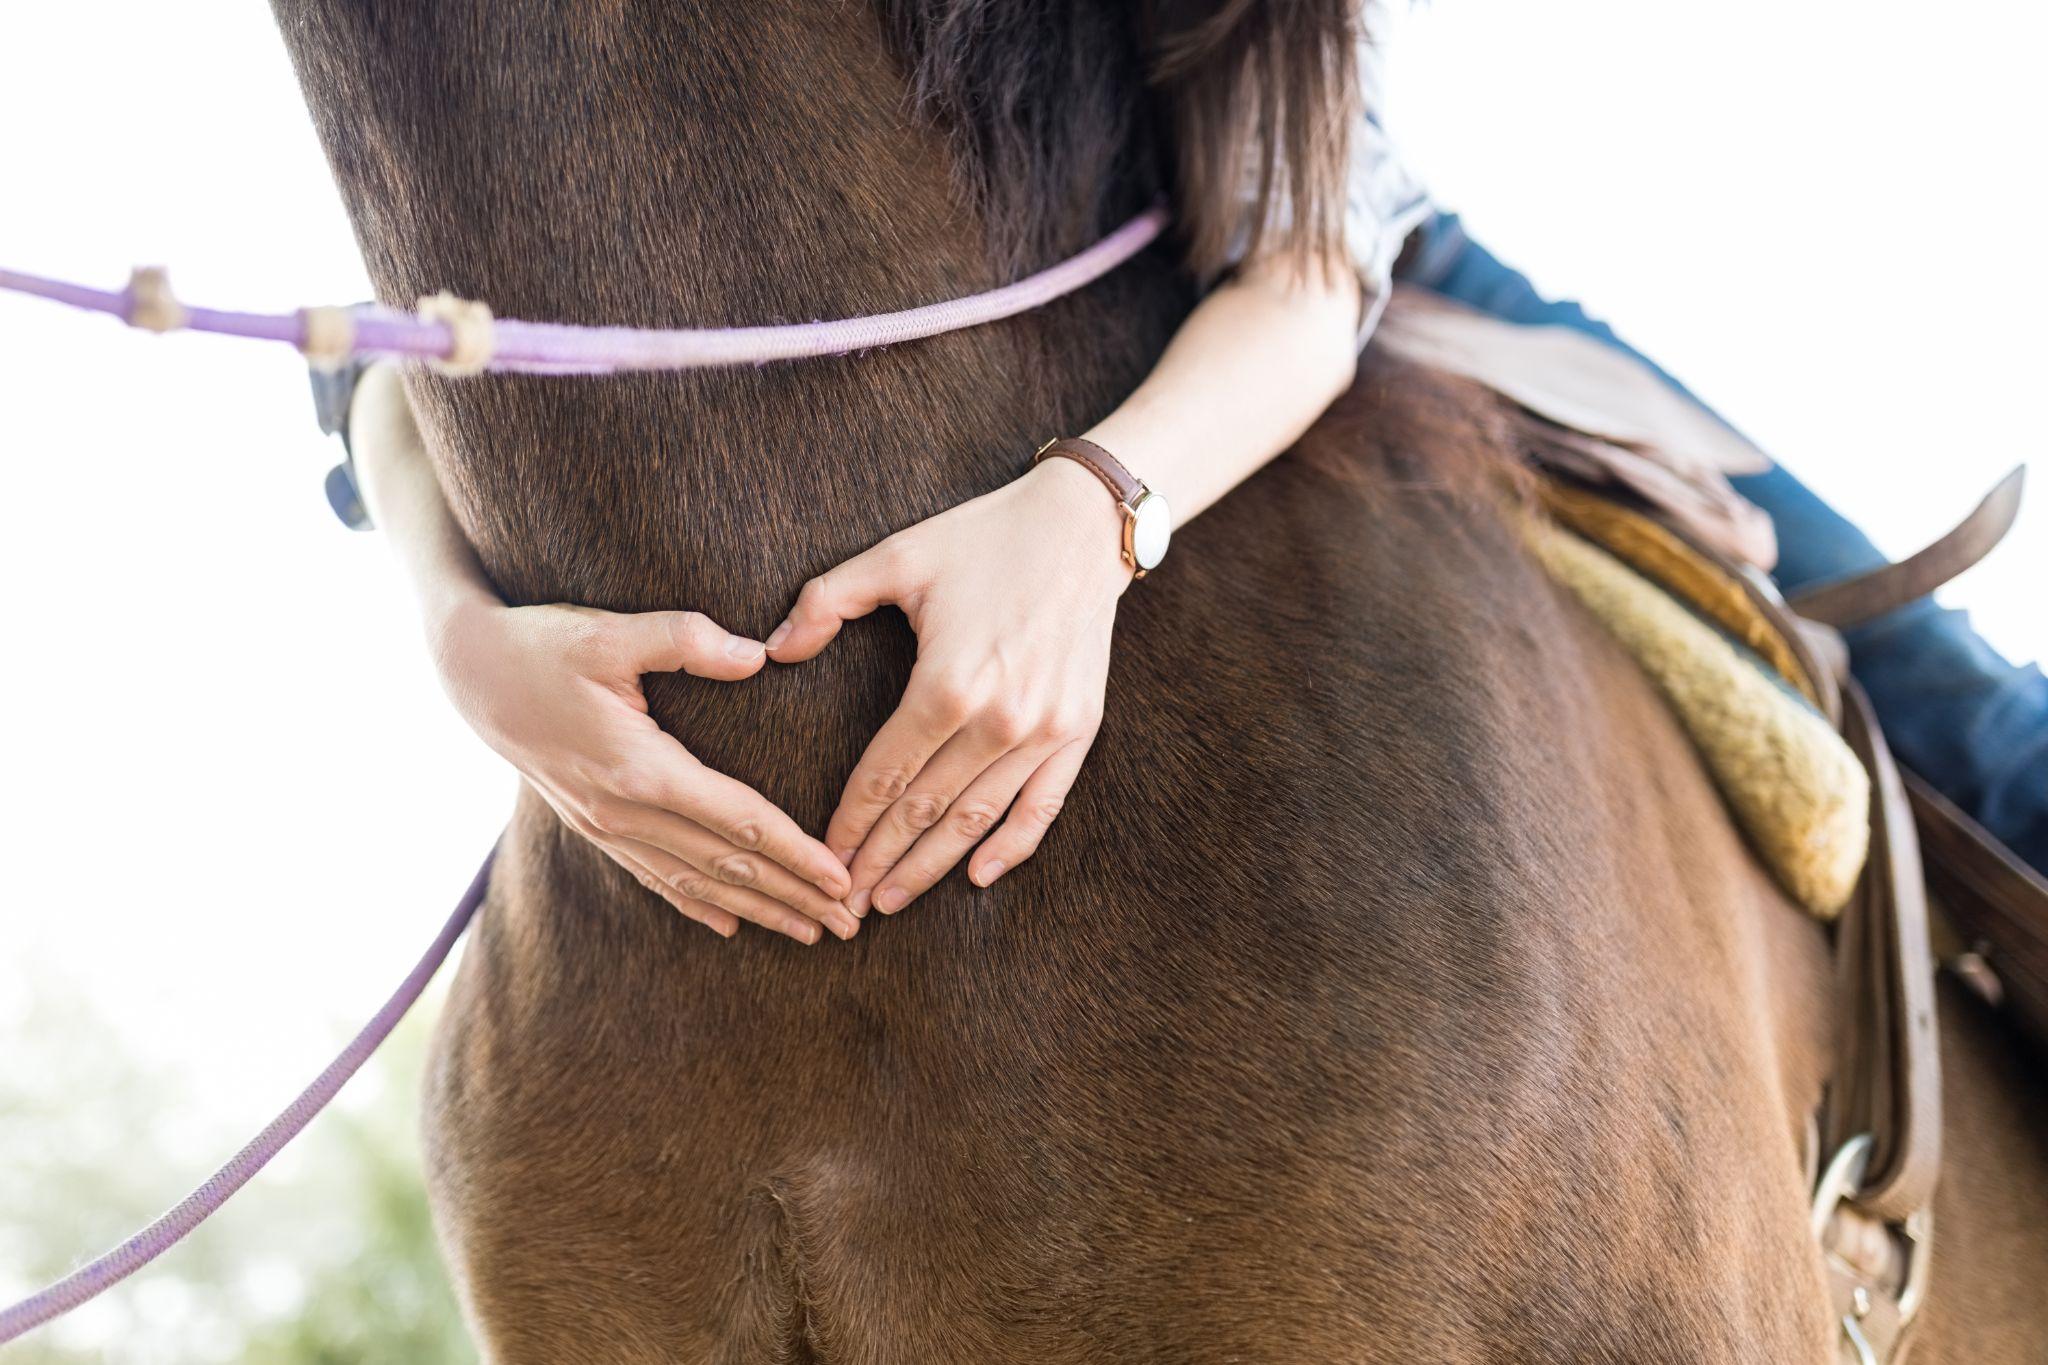 Hands of female rider forming heart shape on horse's body at ranch